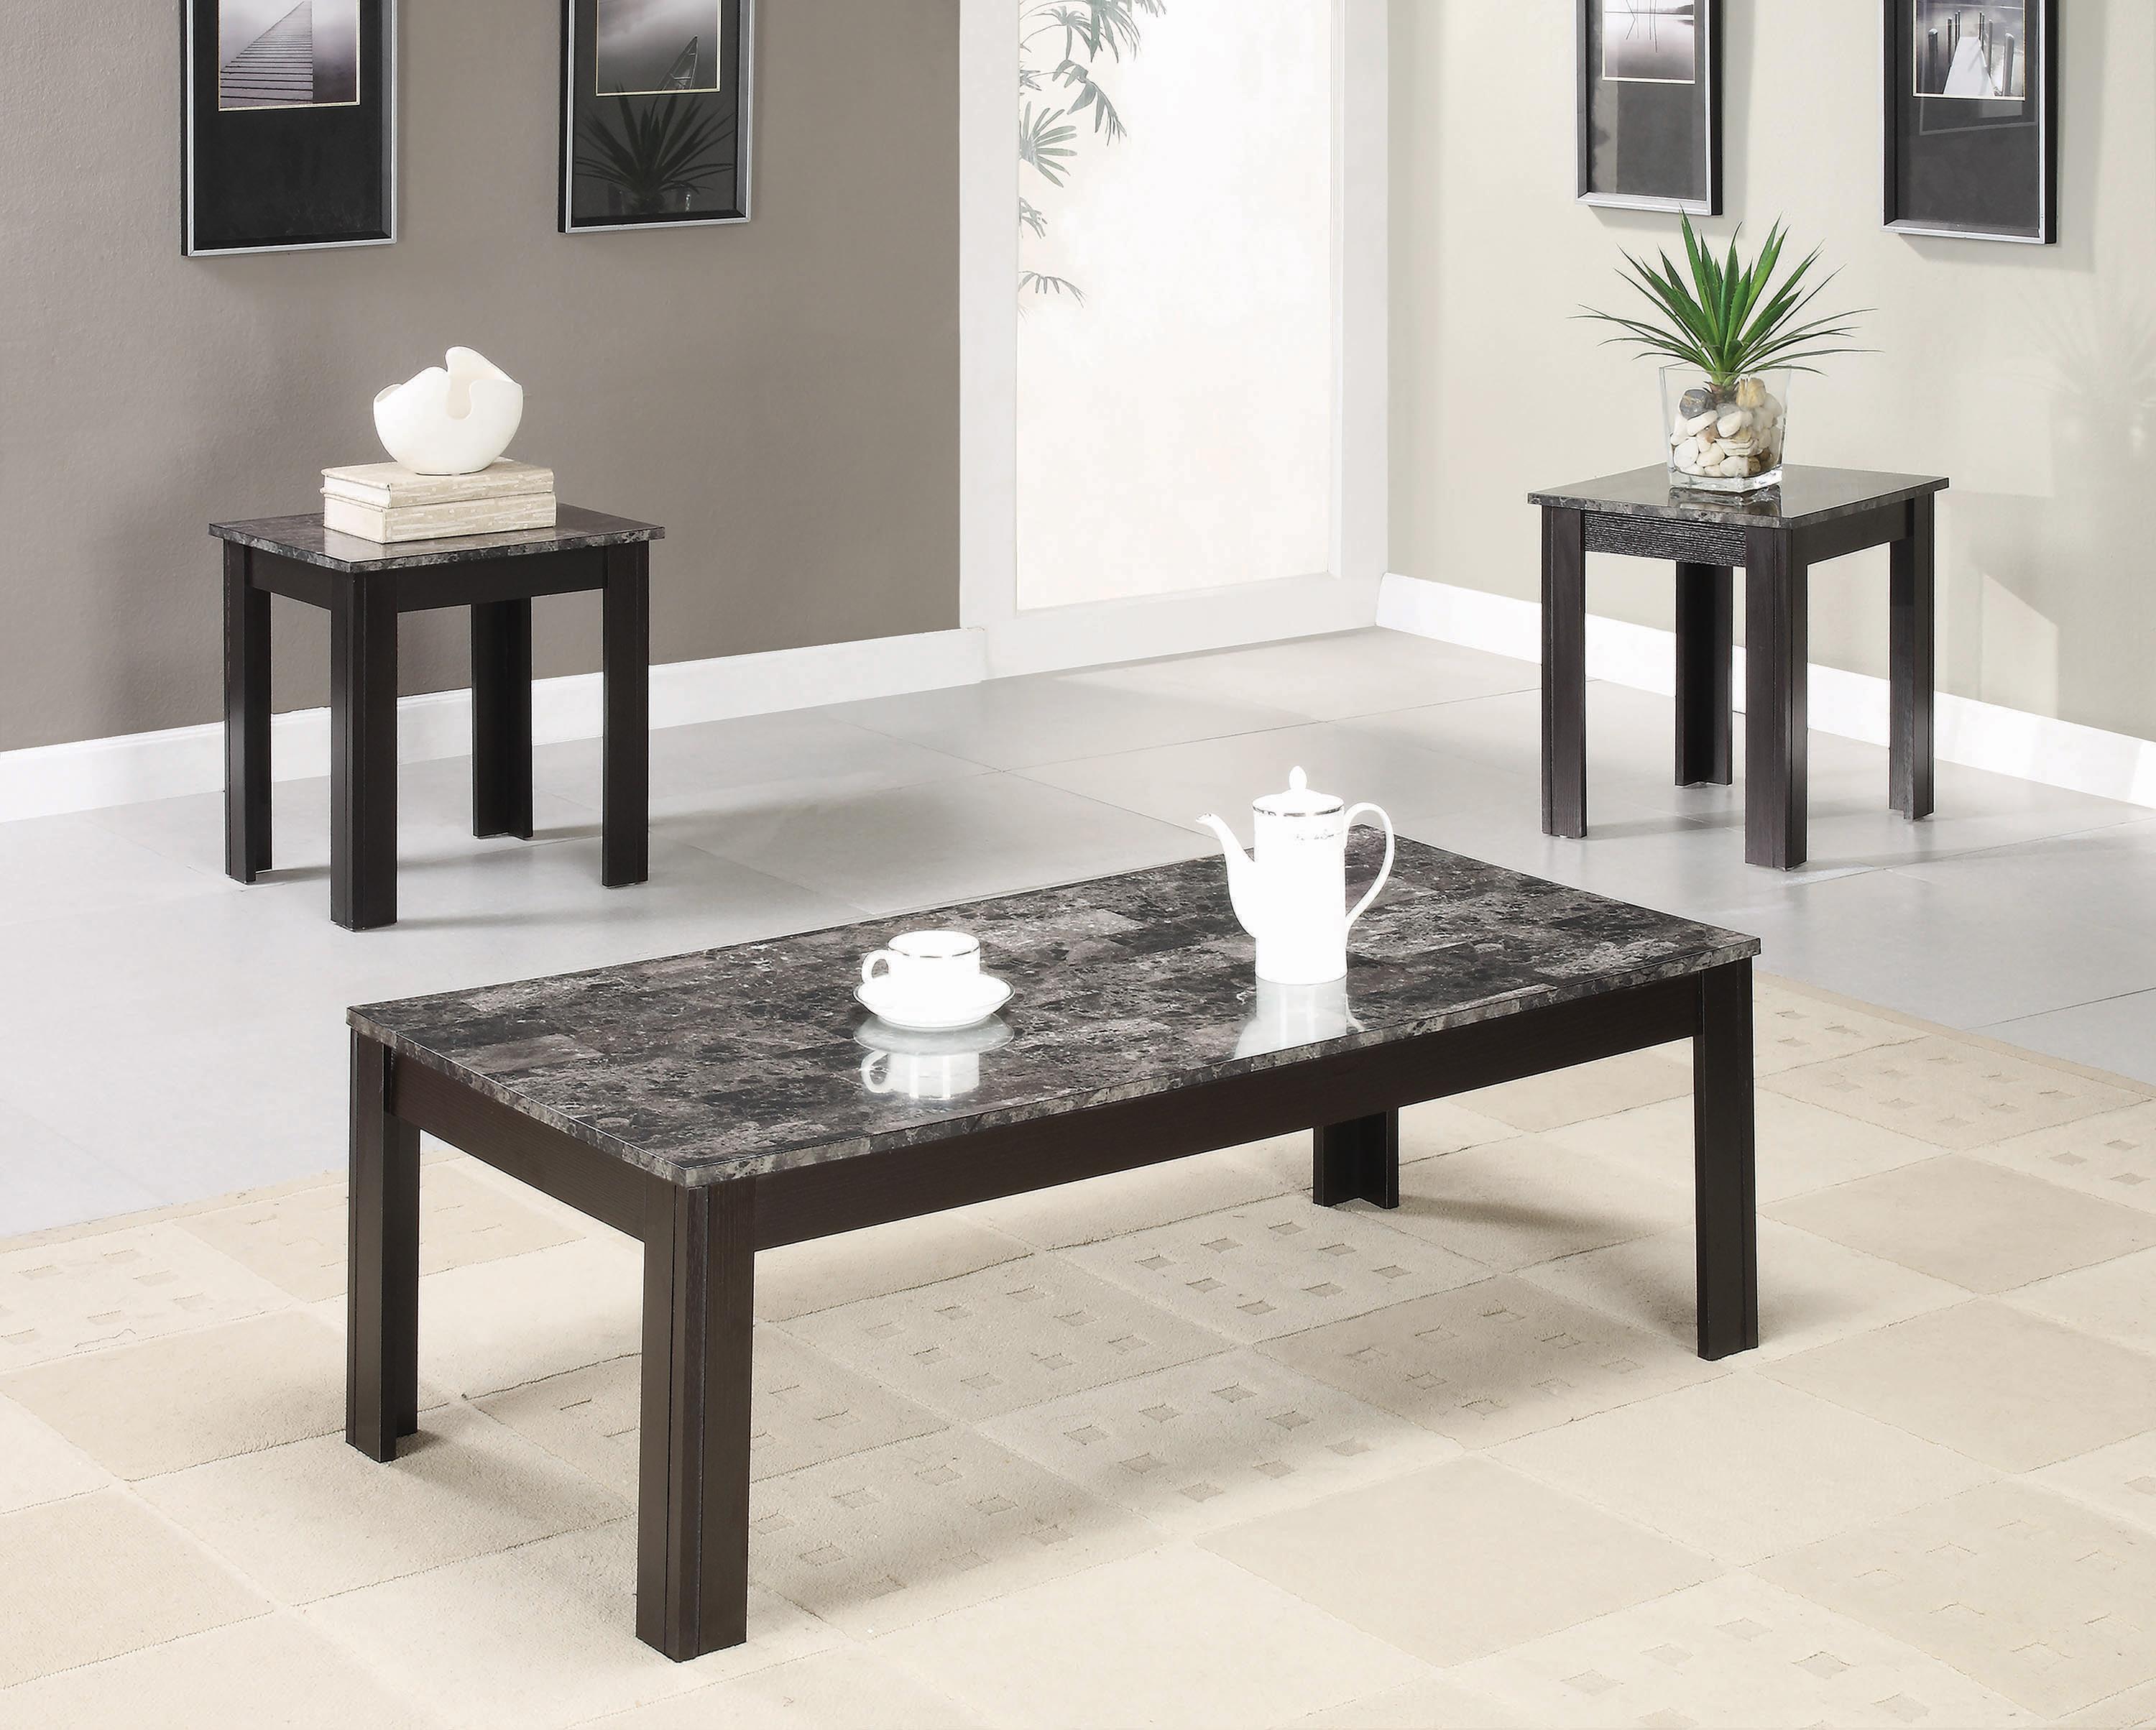 Transitional Occasional Table Set 700375 700375 in Black 